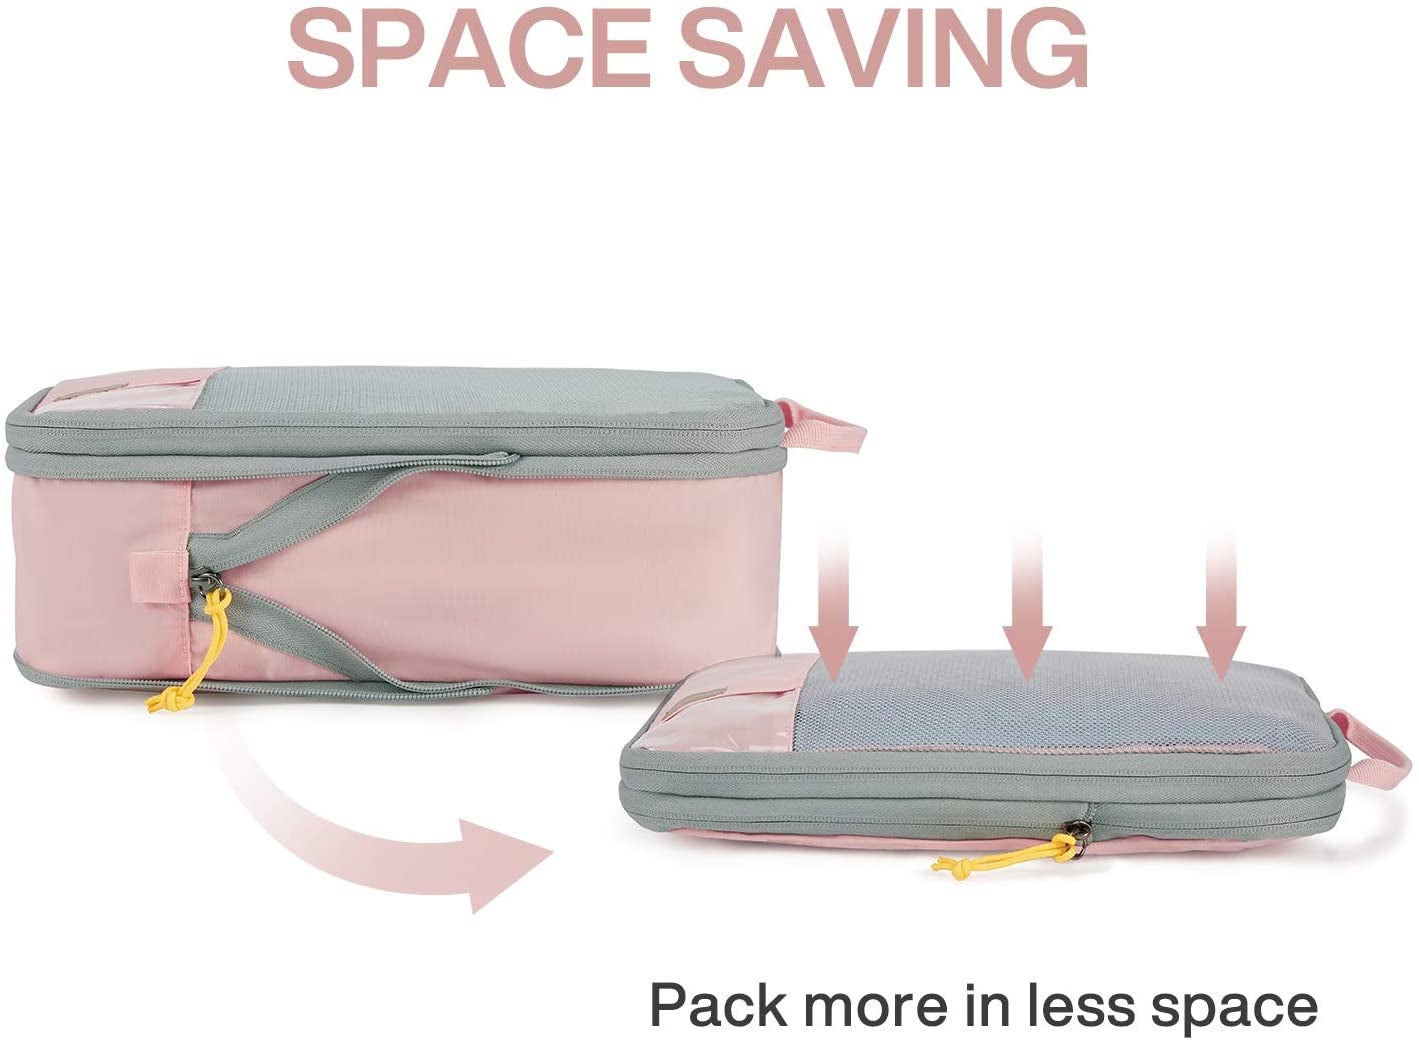 The Chestnut 8 Space Saver Bags - Packing Bags - Travel Must Ha